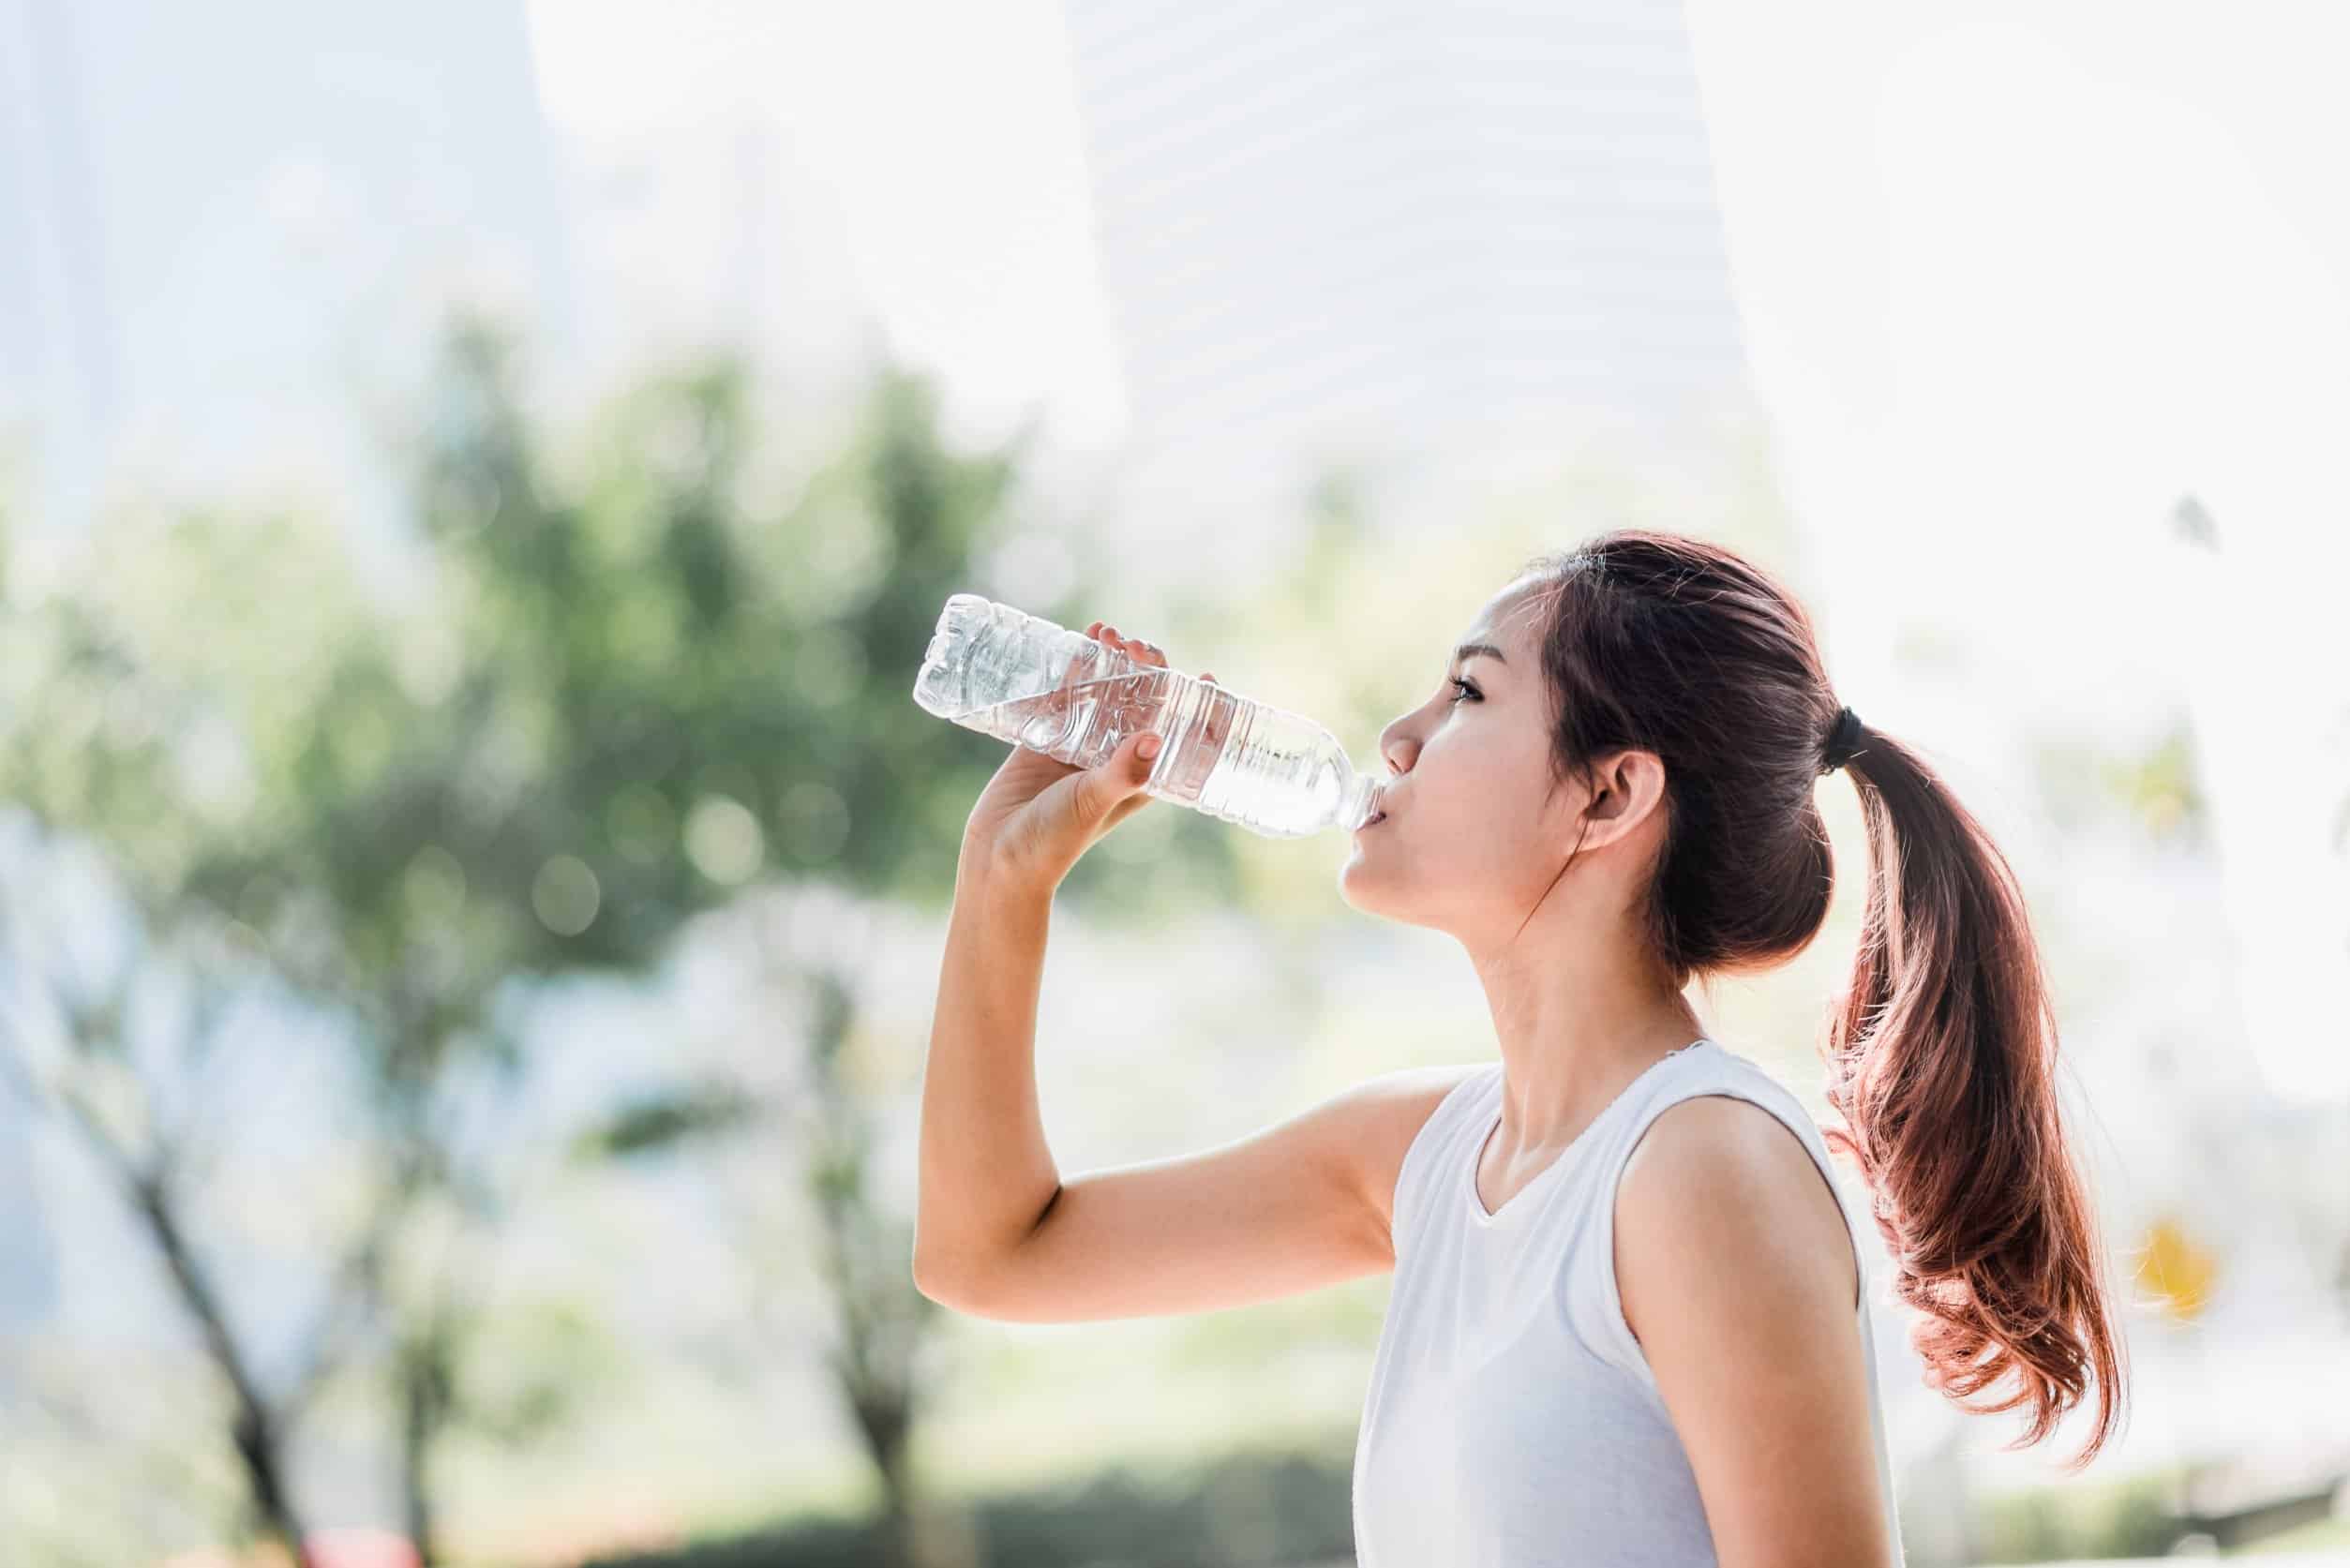 Reasons You Should Drink More Water